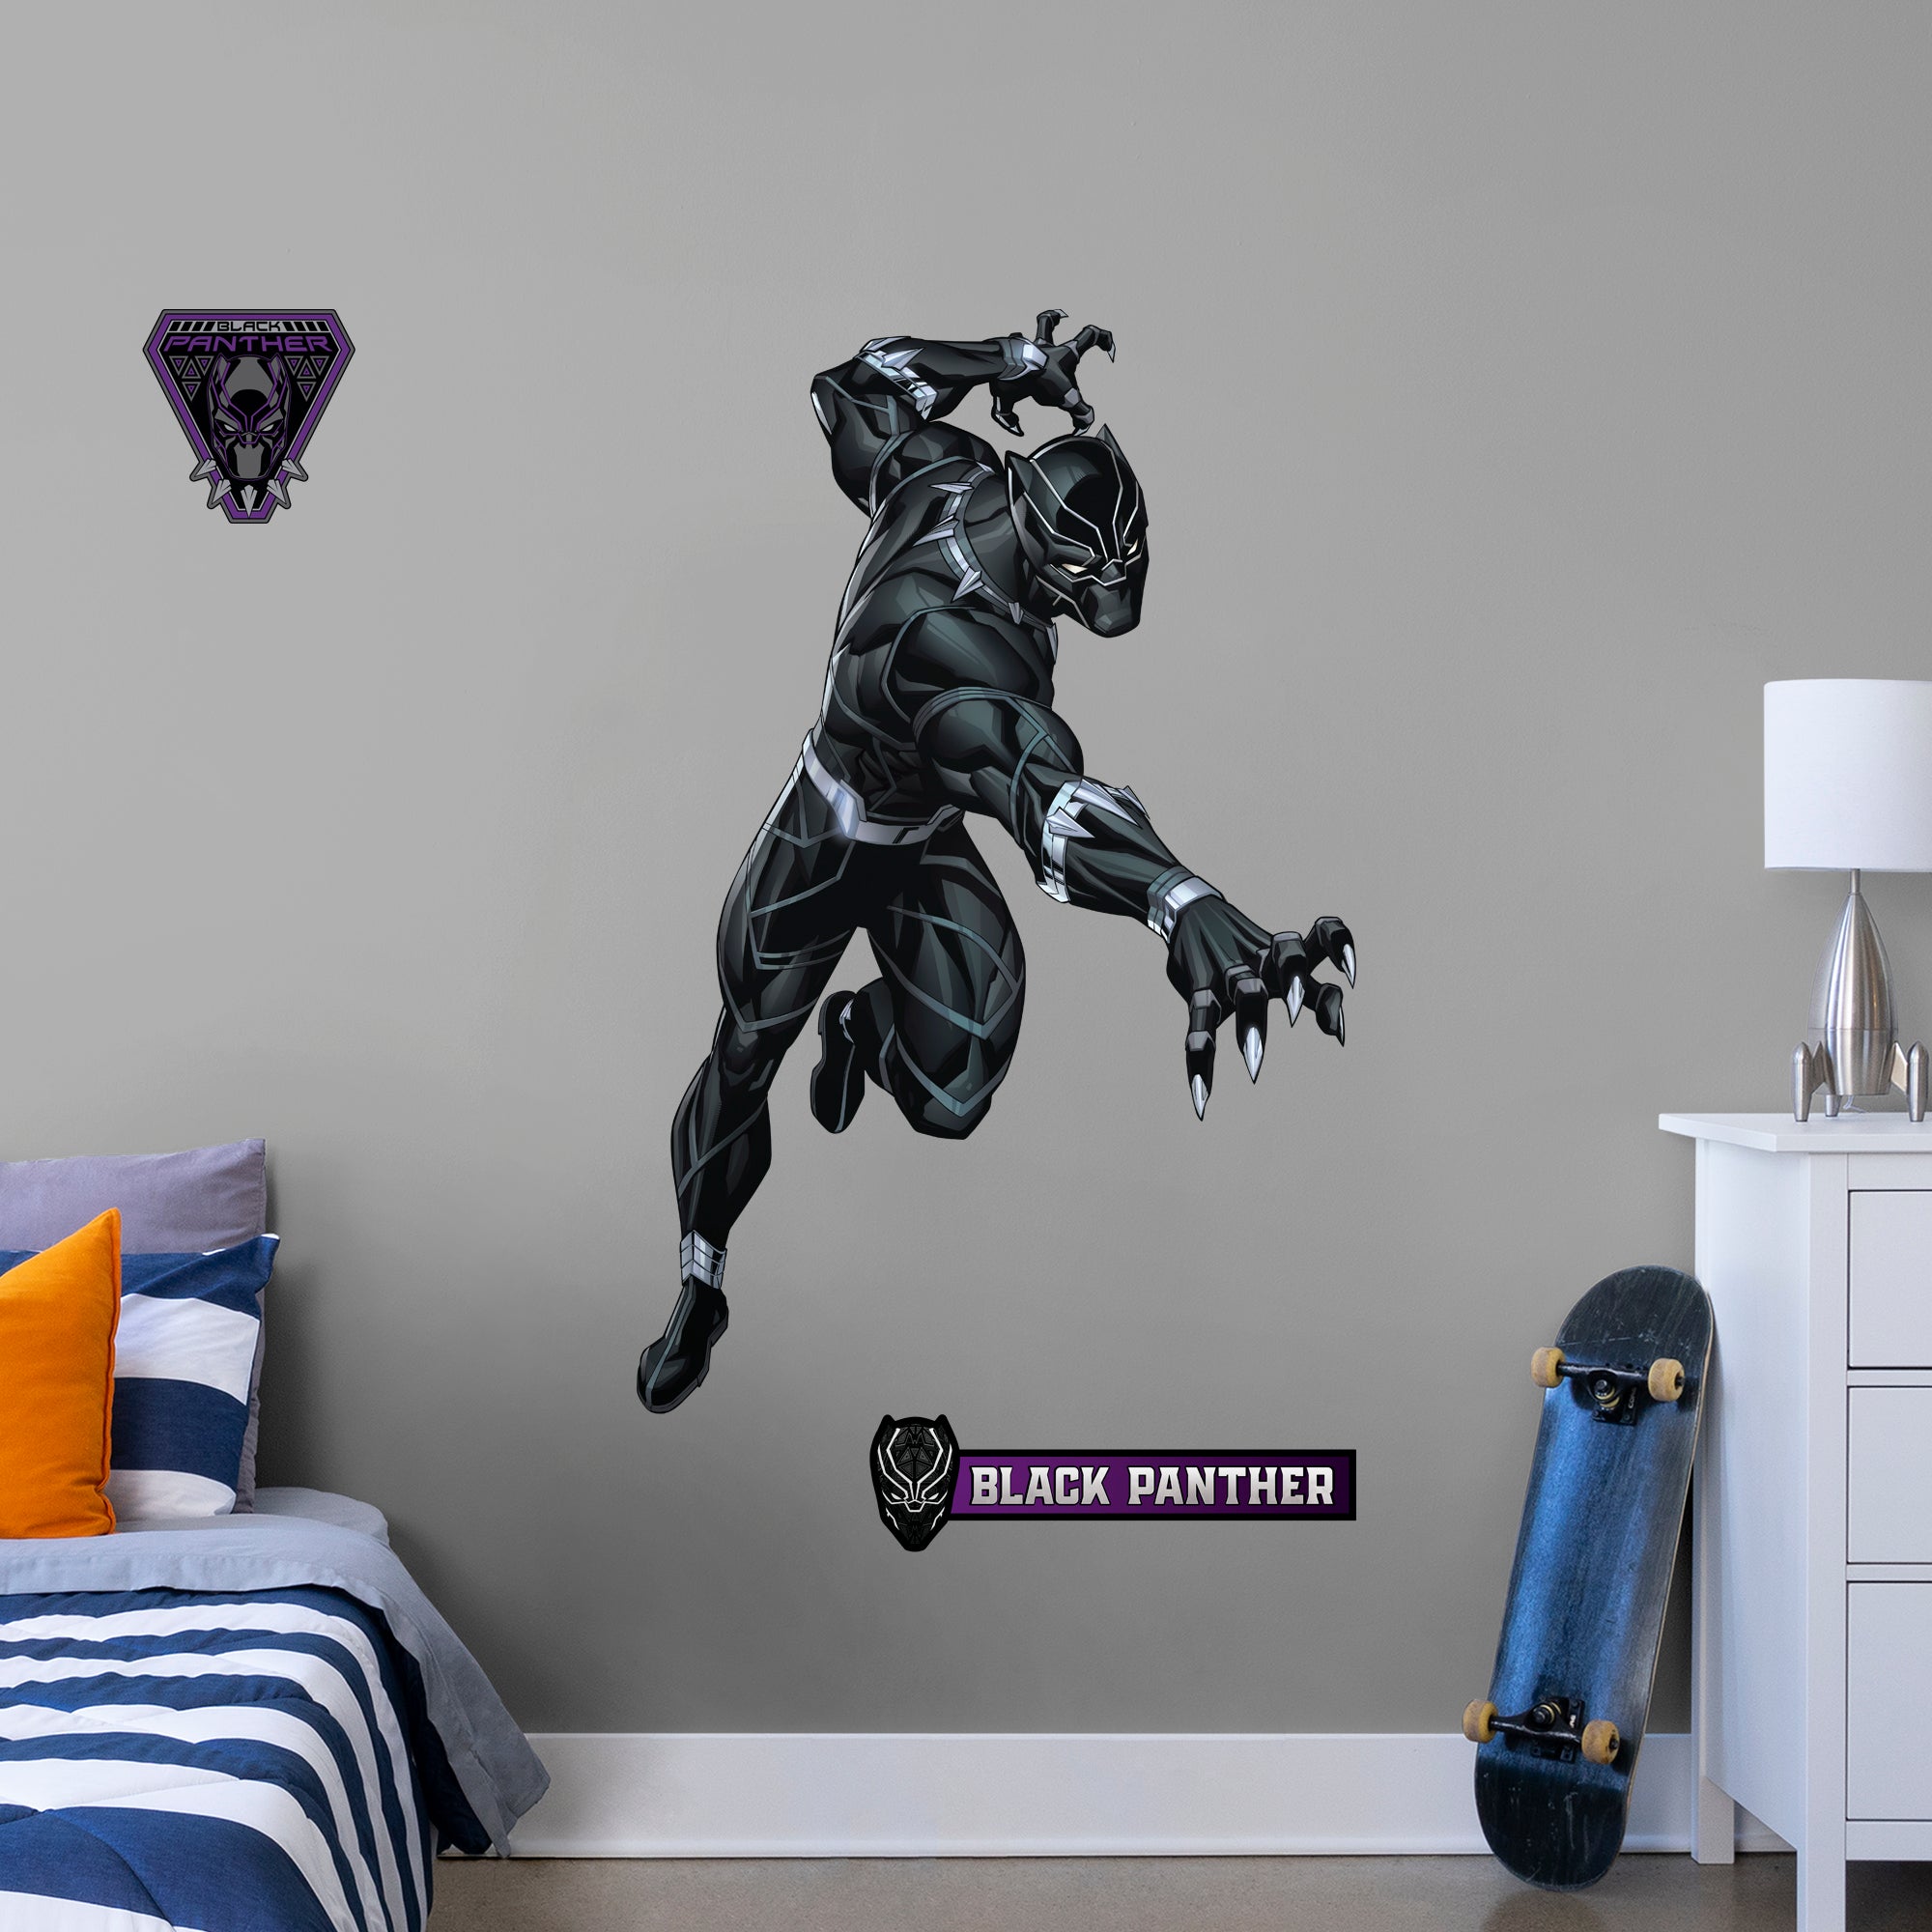 Black Panther: Avengers Core - Officially Licensed Removable Wall Decal Giant Character + 2 Decals (37.5"W x 51"H) by Fathead |